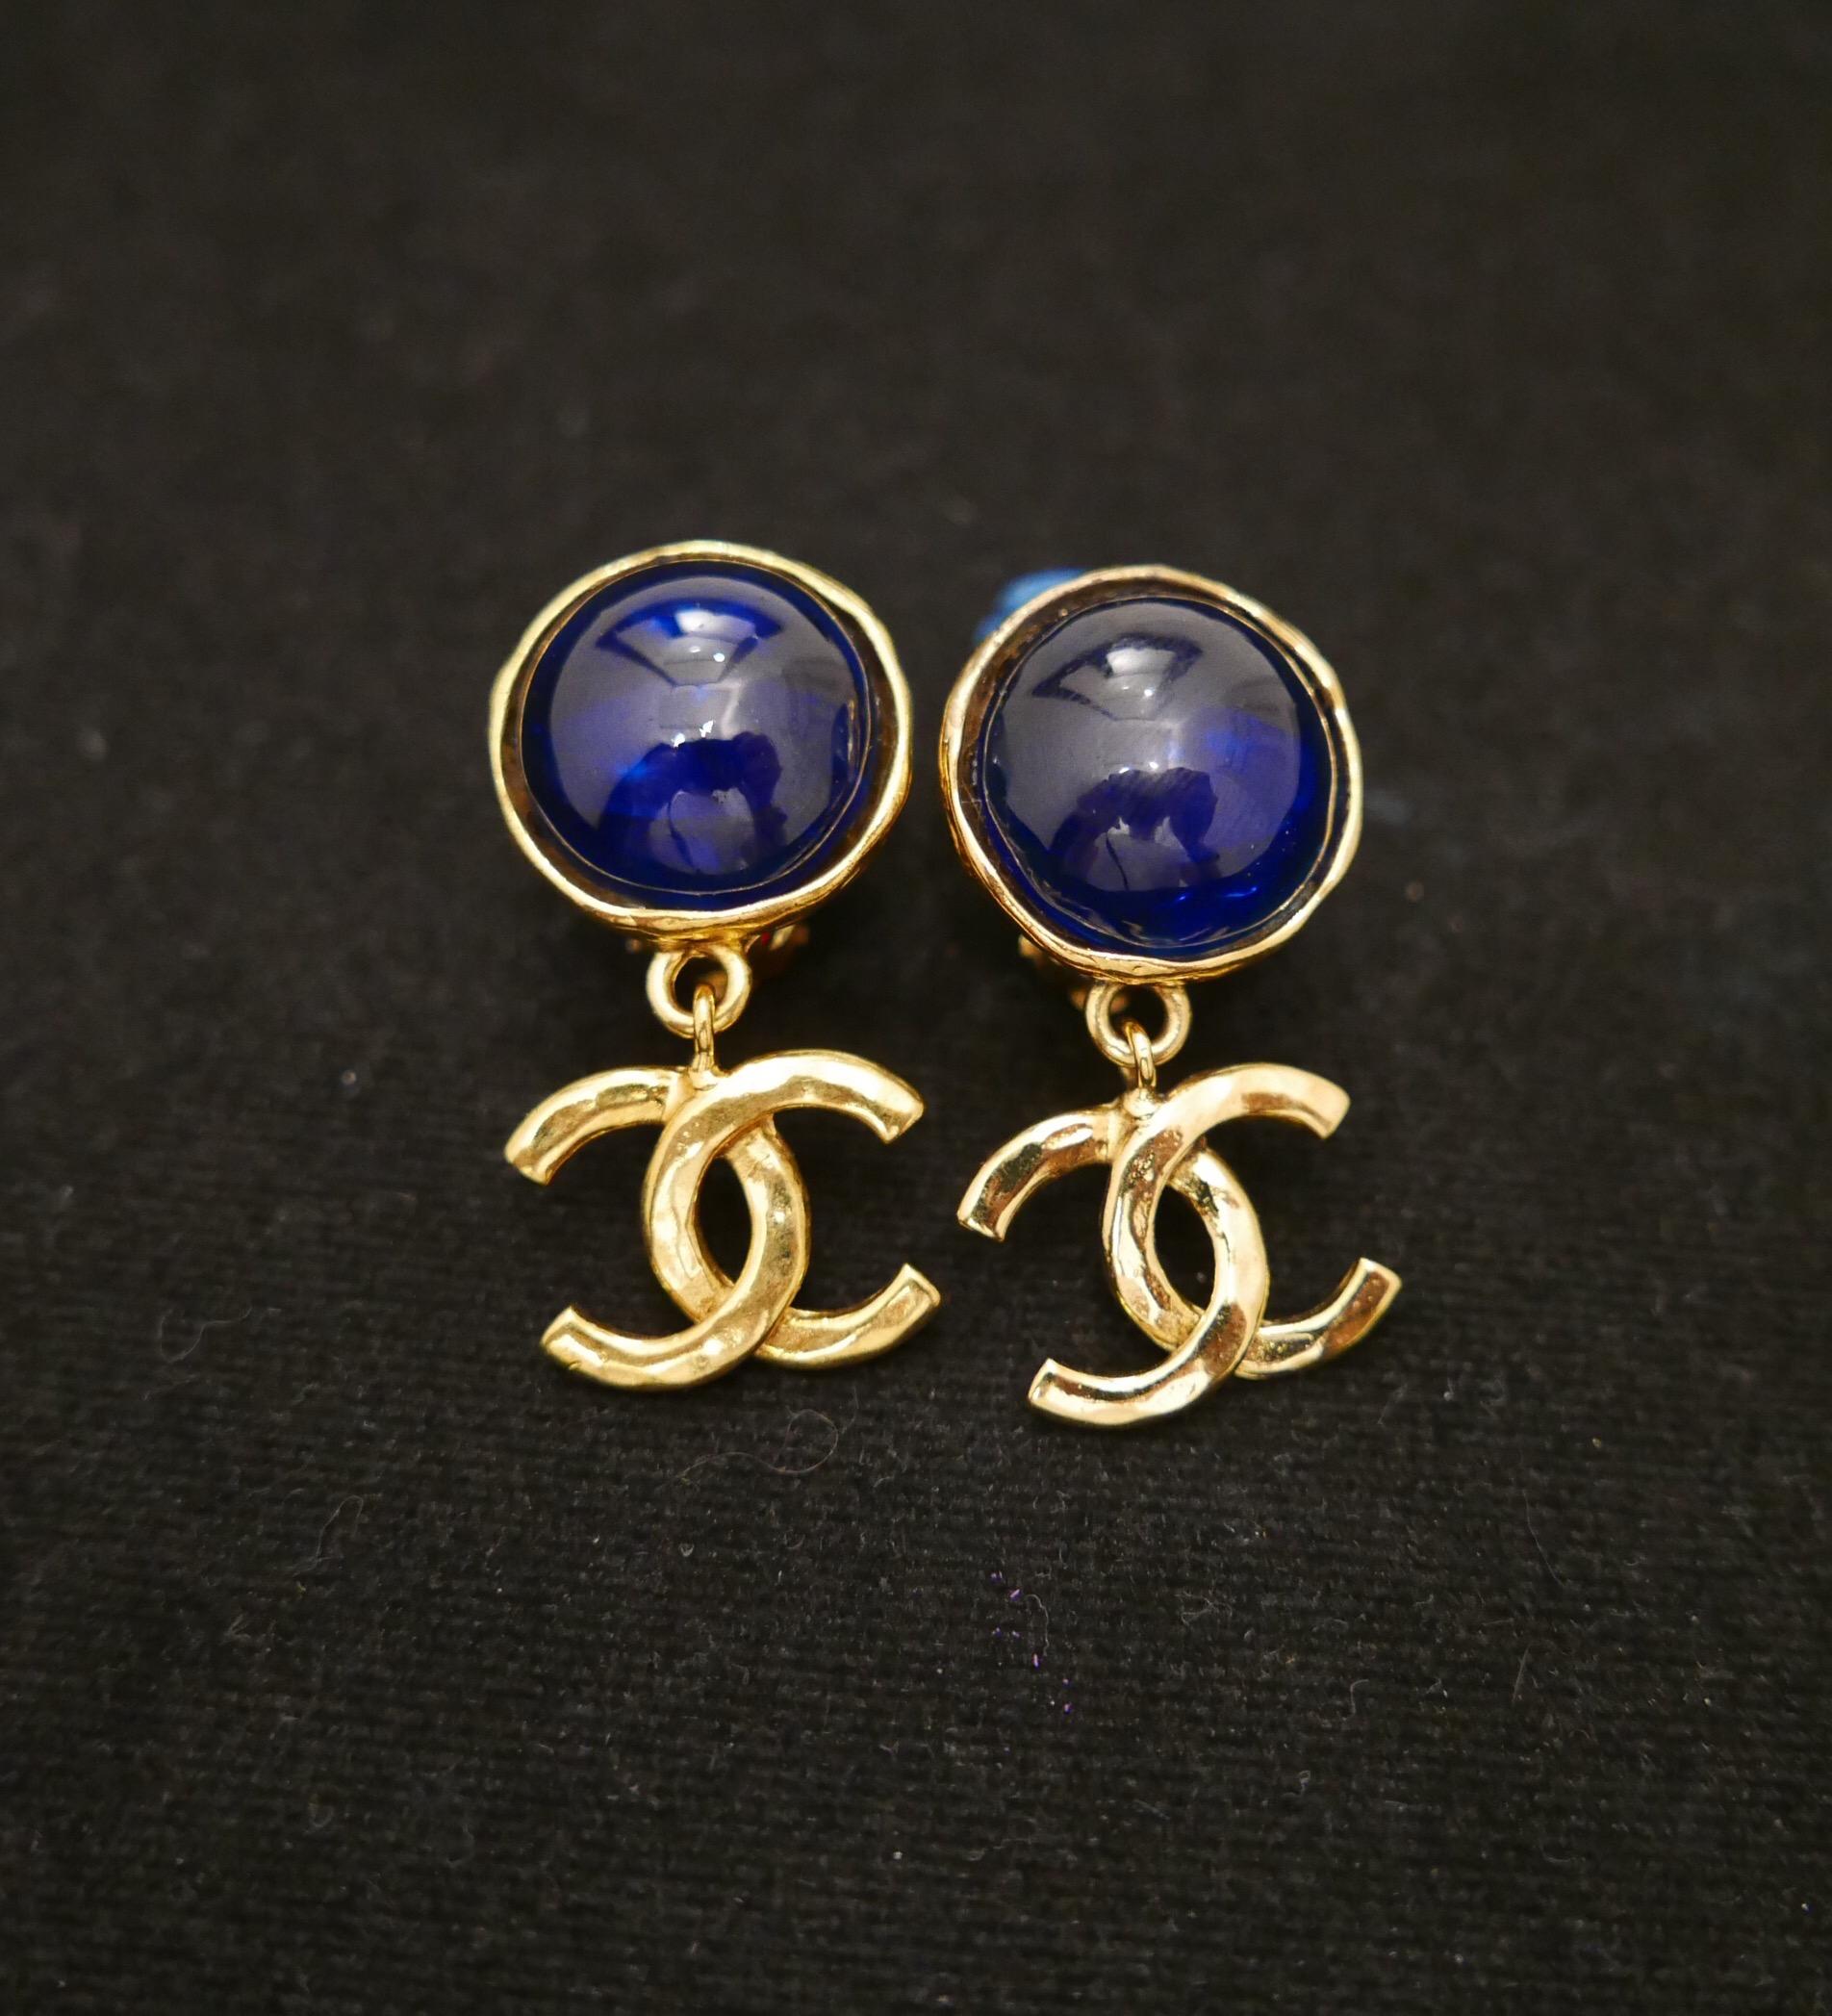 Pair of 1990s Chanel gold toned earclips featuring a blue gripoix hemisphere adorned with a dangle gold toned CC logo. Measures approximately 4.4 x 2.2cm. Stamped Chanel 94P, made in France. Clip on style. Comes with box.

Condition: Minor signs of